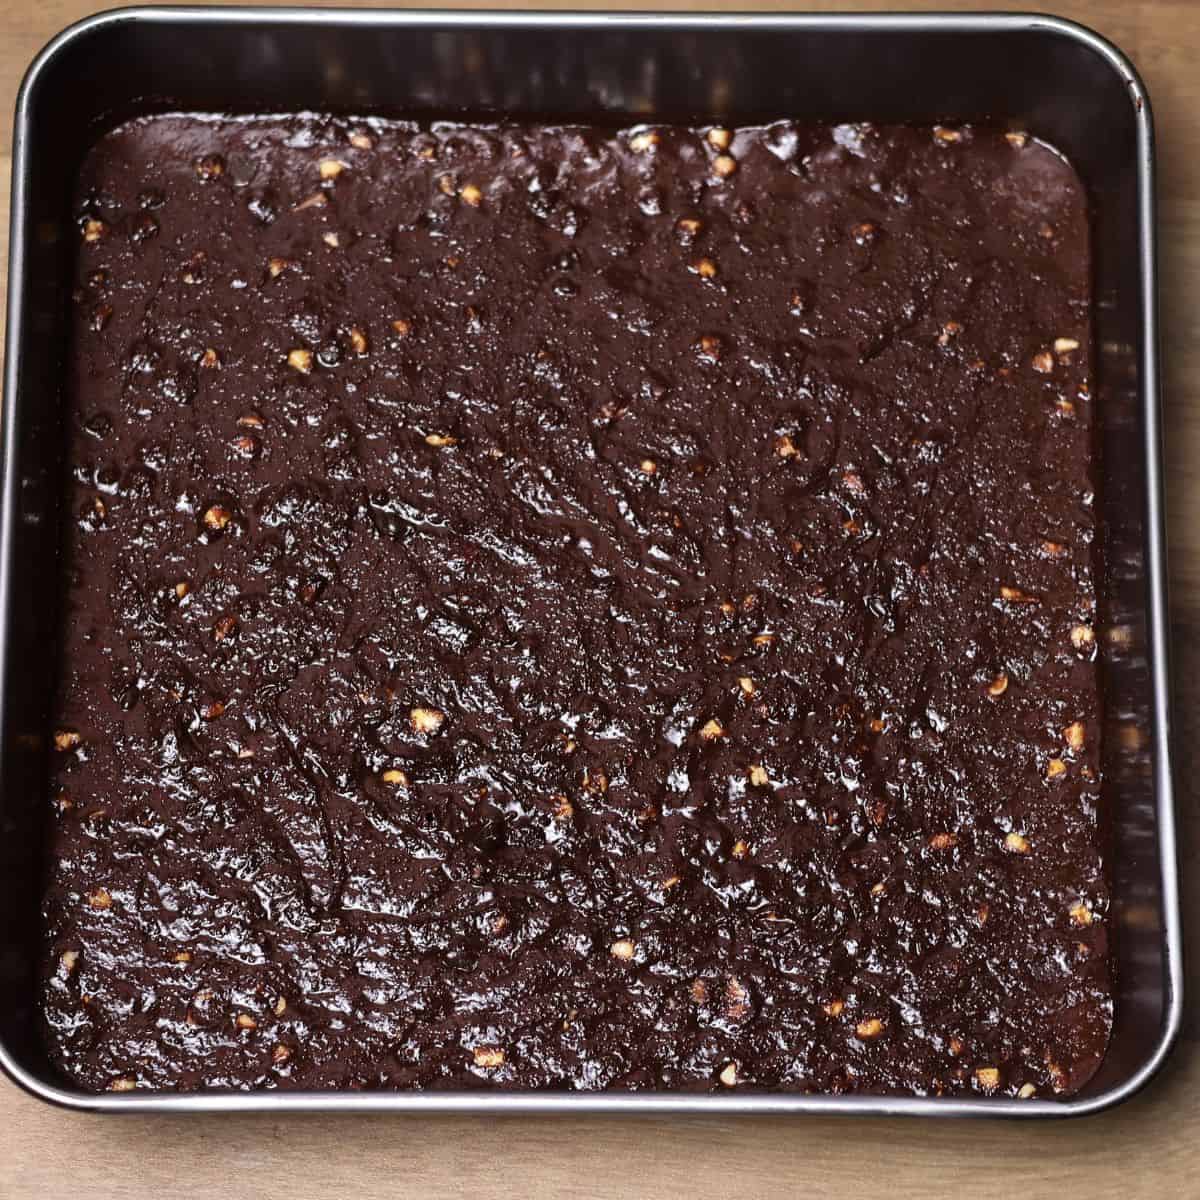 Brownie batter evenly spread in a square pan, speckled with nuts, ready to be baked in the oven.